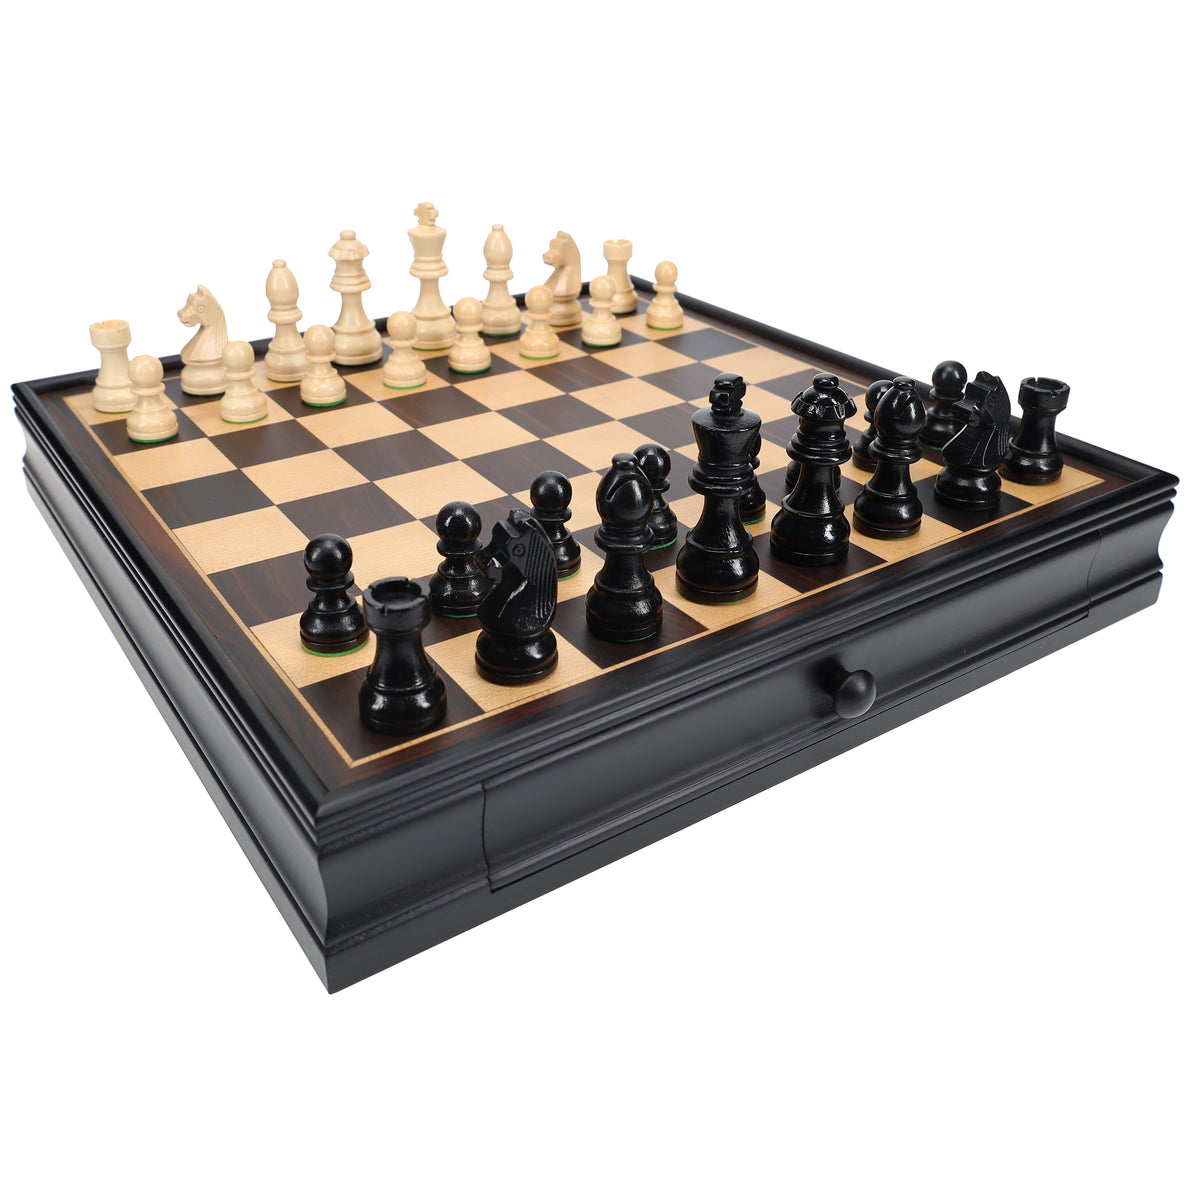 The Queen's Gambit Inspired Chess Pieces - 3.75 King